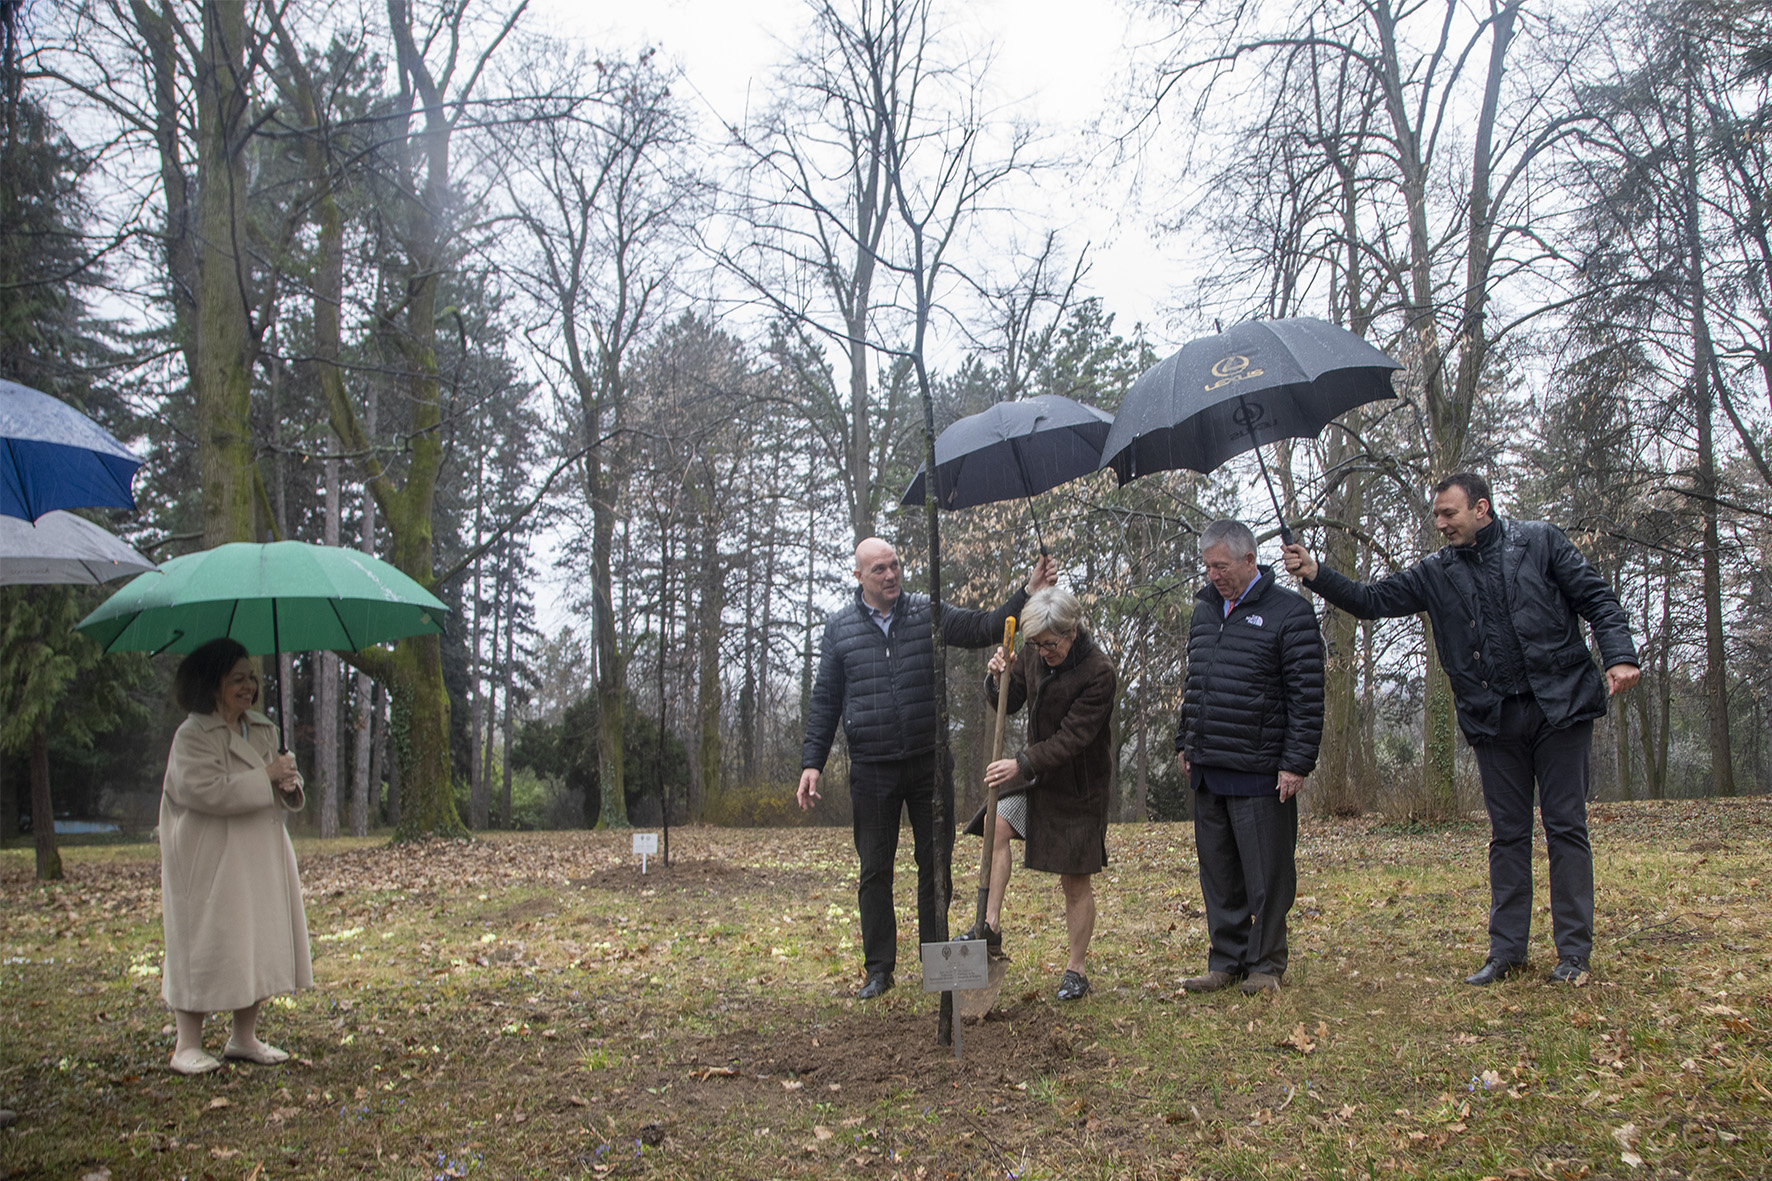 The Ambassador of the Kingdom of Belgium in Serbia, HE Mrs. Cathy Buggenhout, planting a tree at the Royal Compound